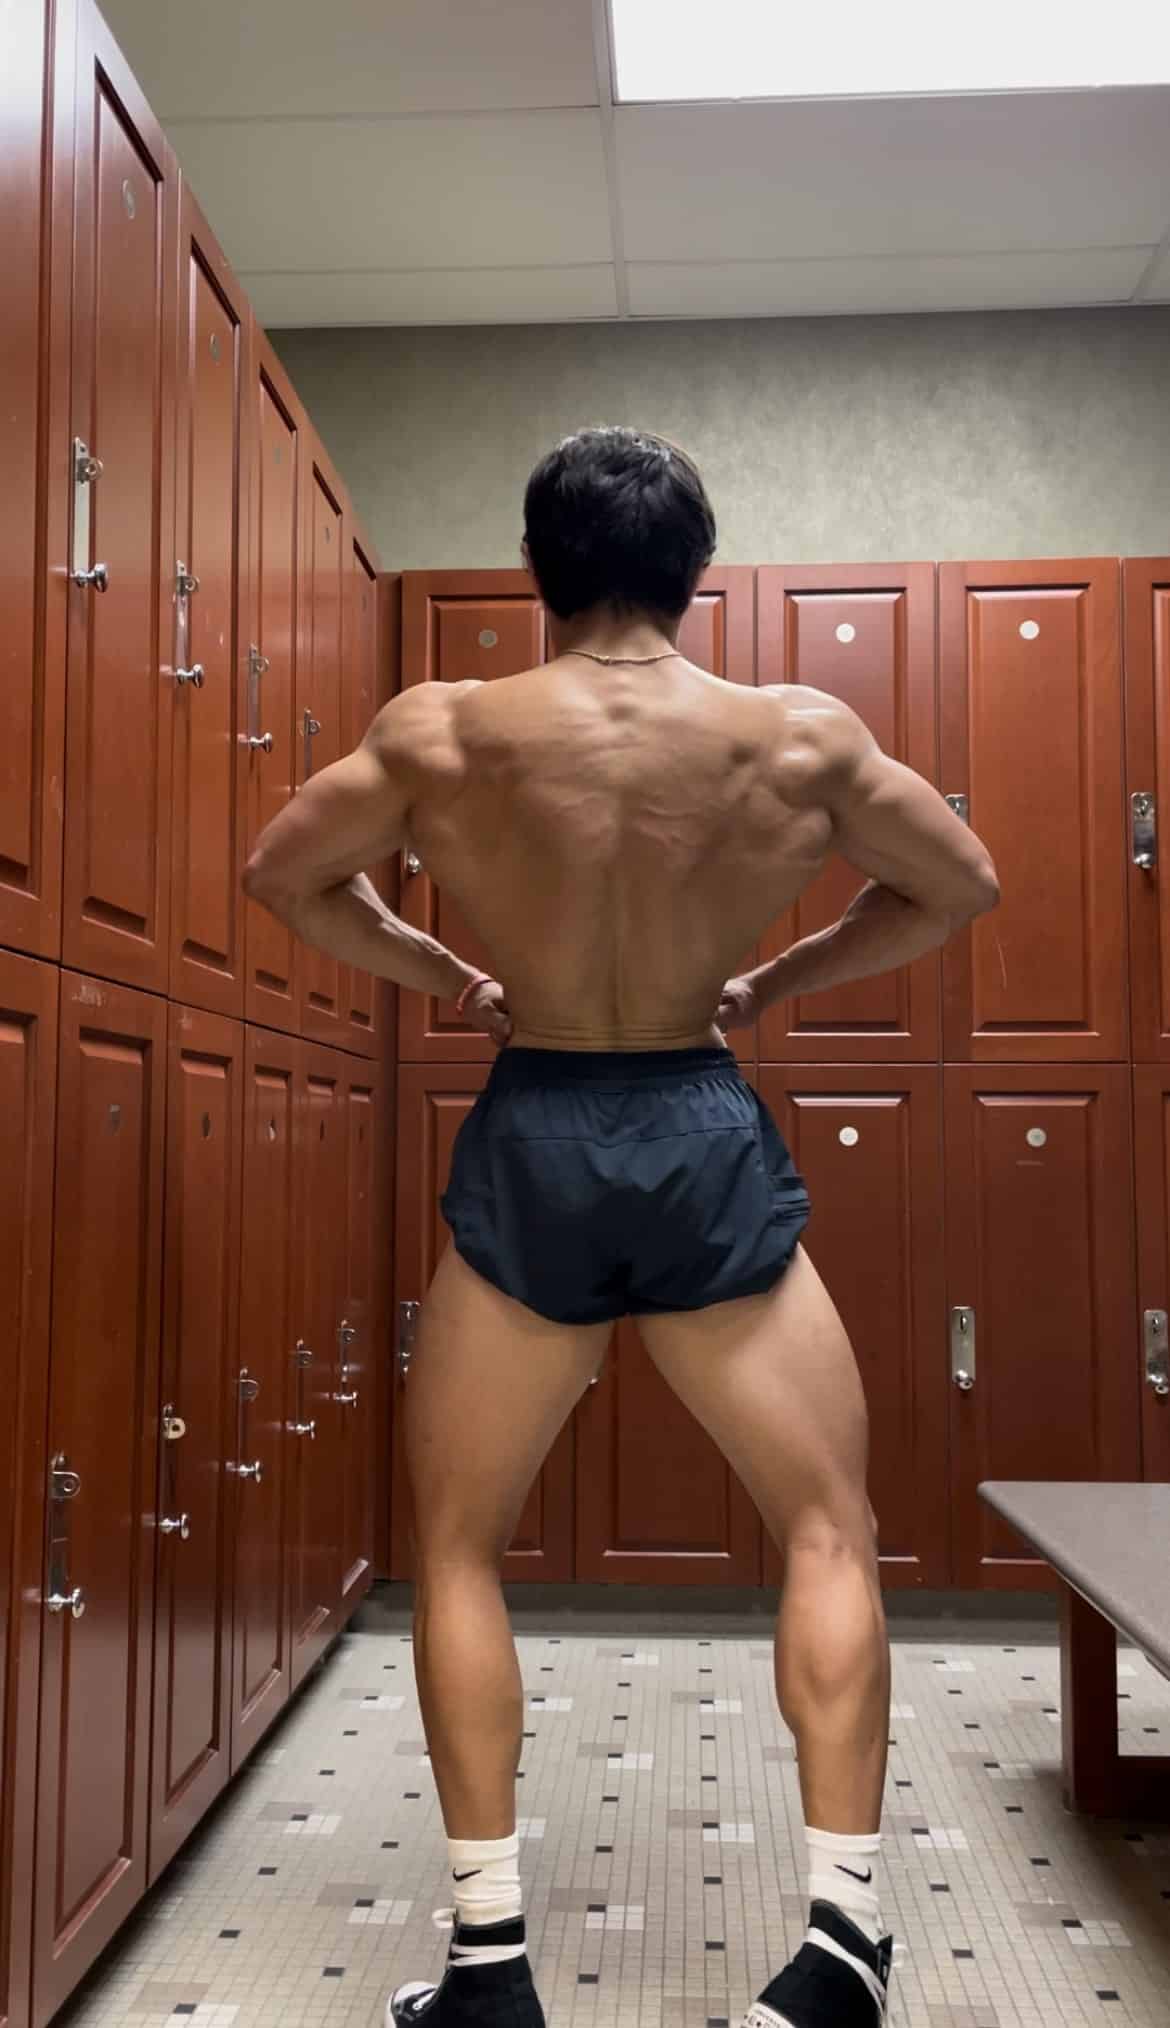 How To Get An Aesthetic V Taper And A Tiny Waist